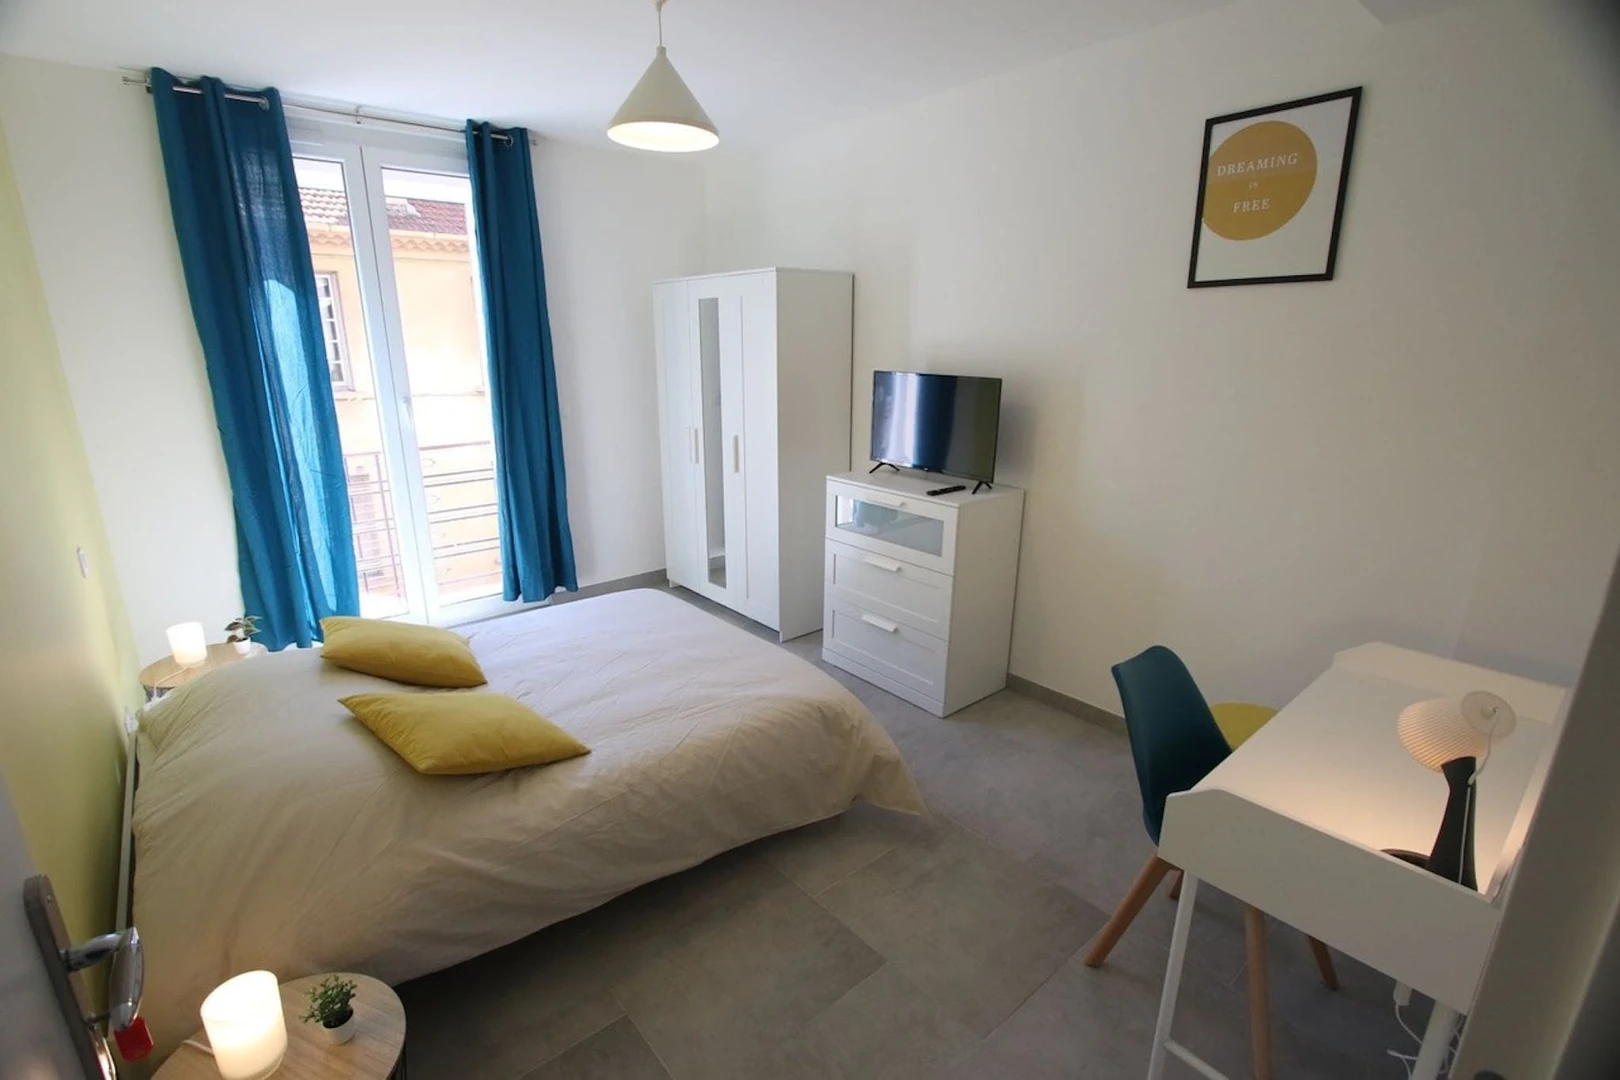 Cheap private room in Toulon